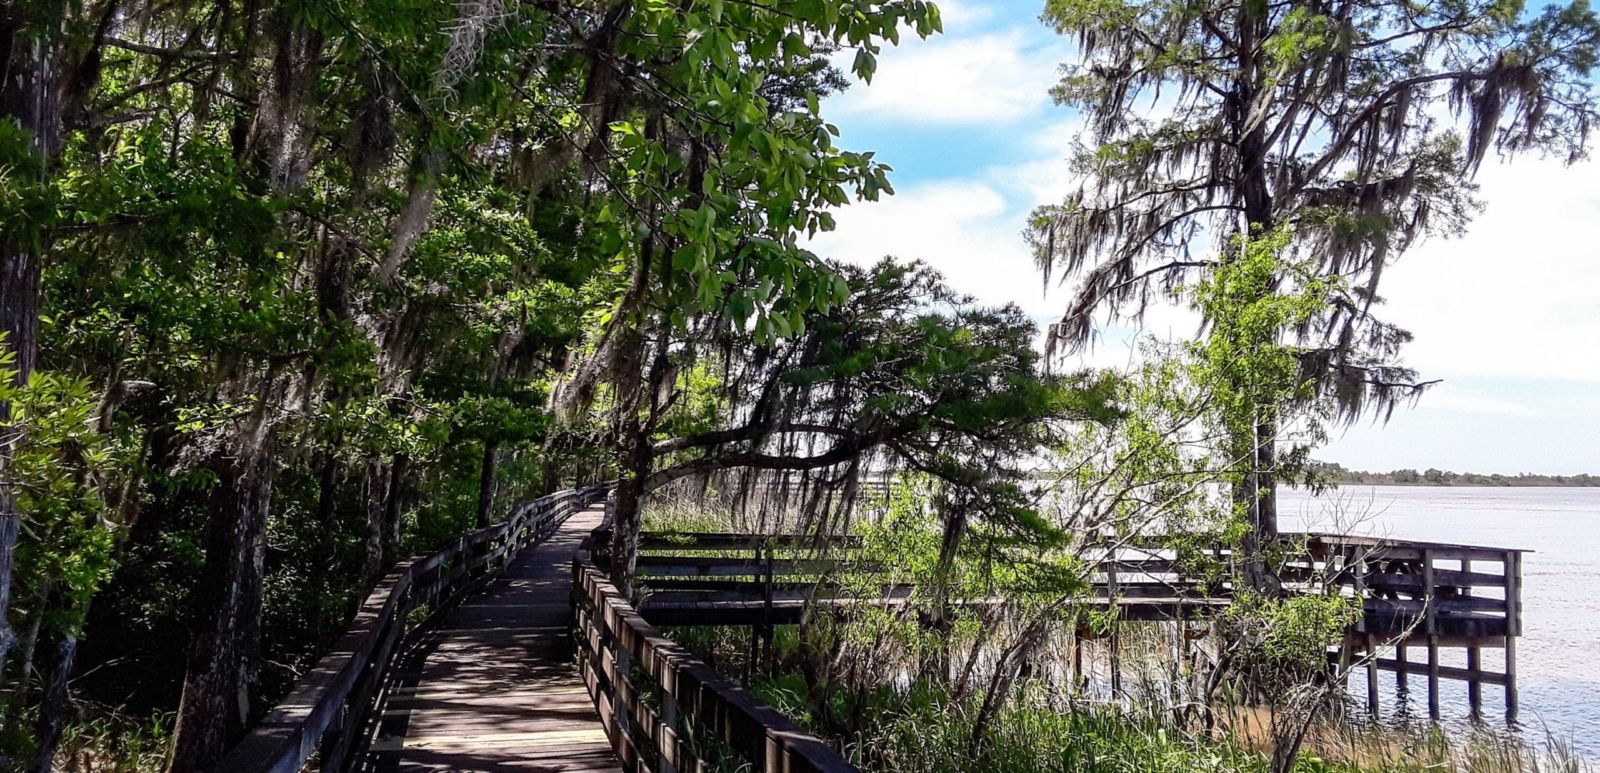 Tensaw River Delta at Historic Blakeley State Park in Spanish Fort, Alabama